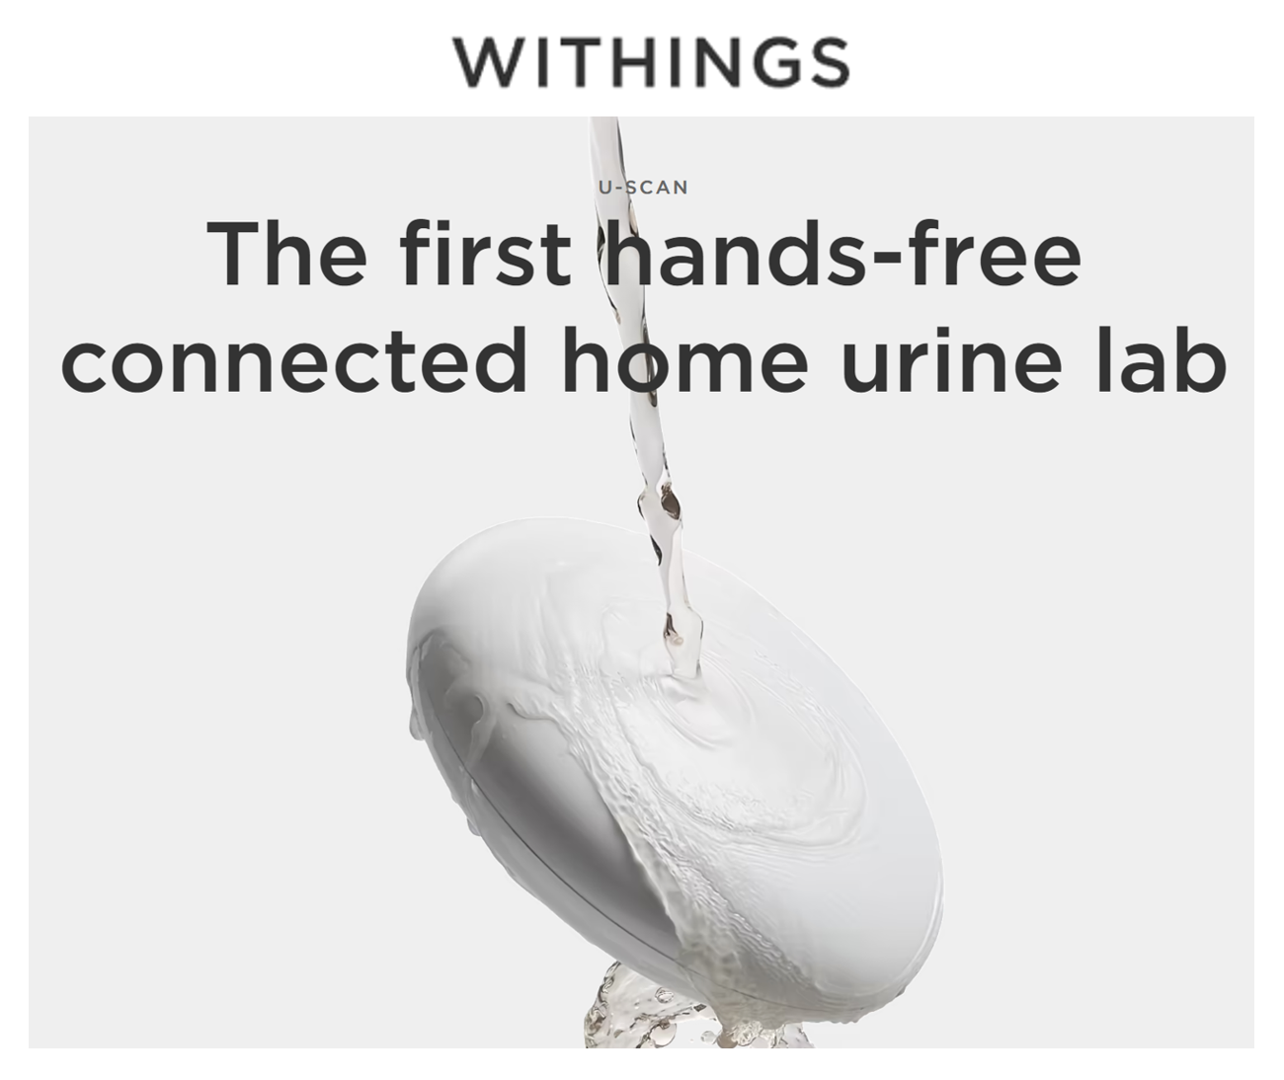 Withings' U-Scan is a must for at-home pee testing